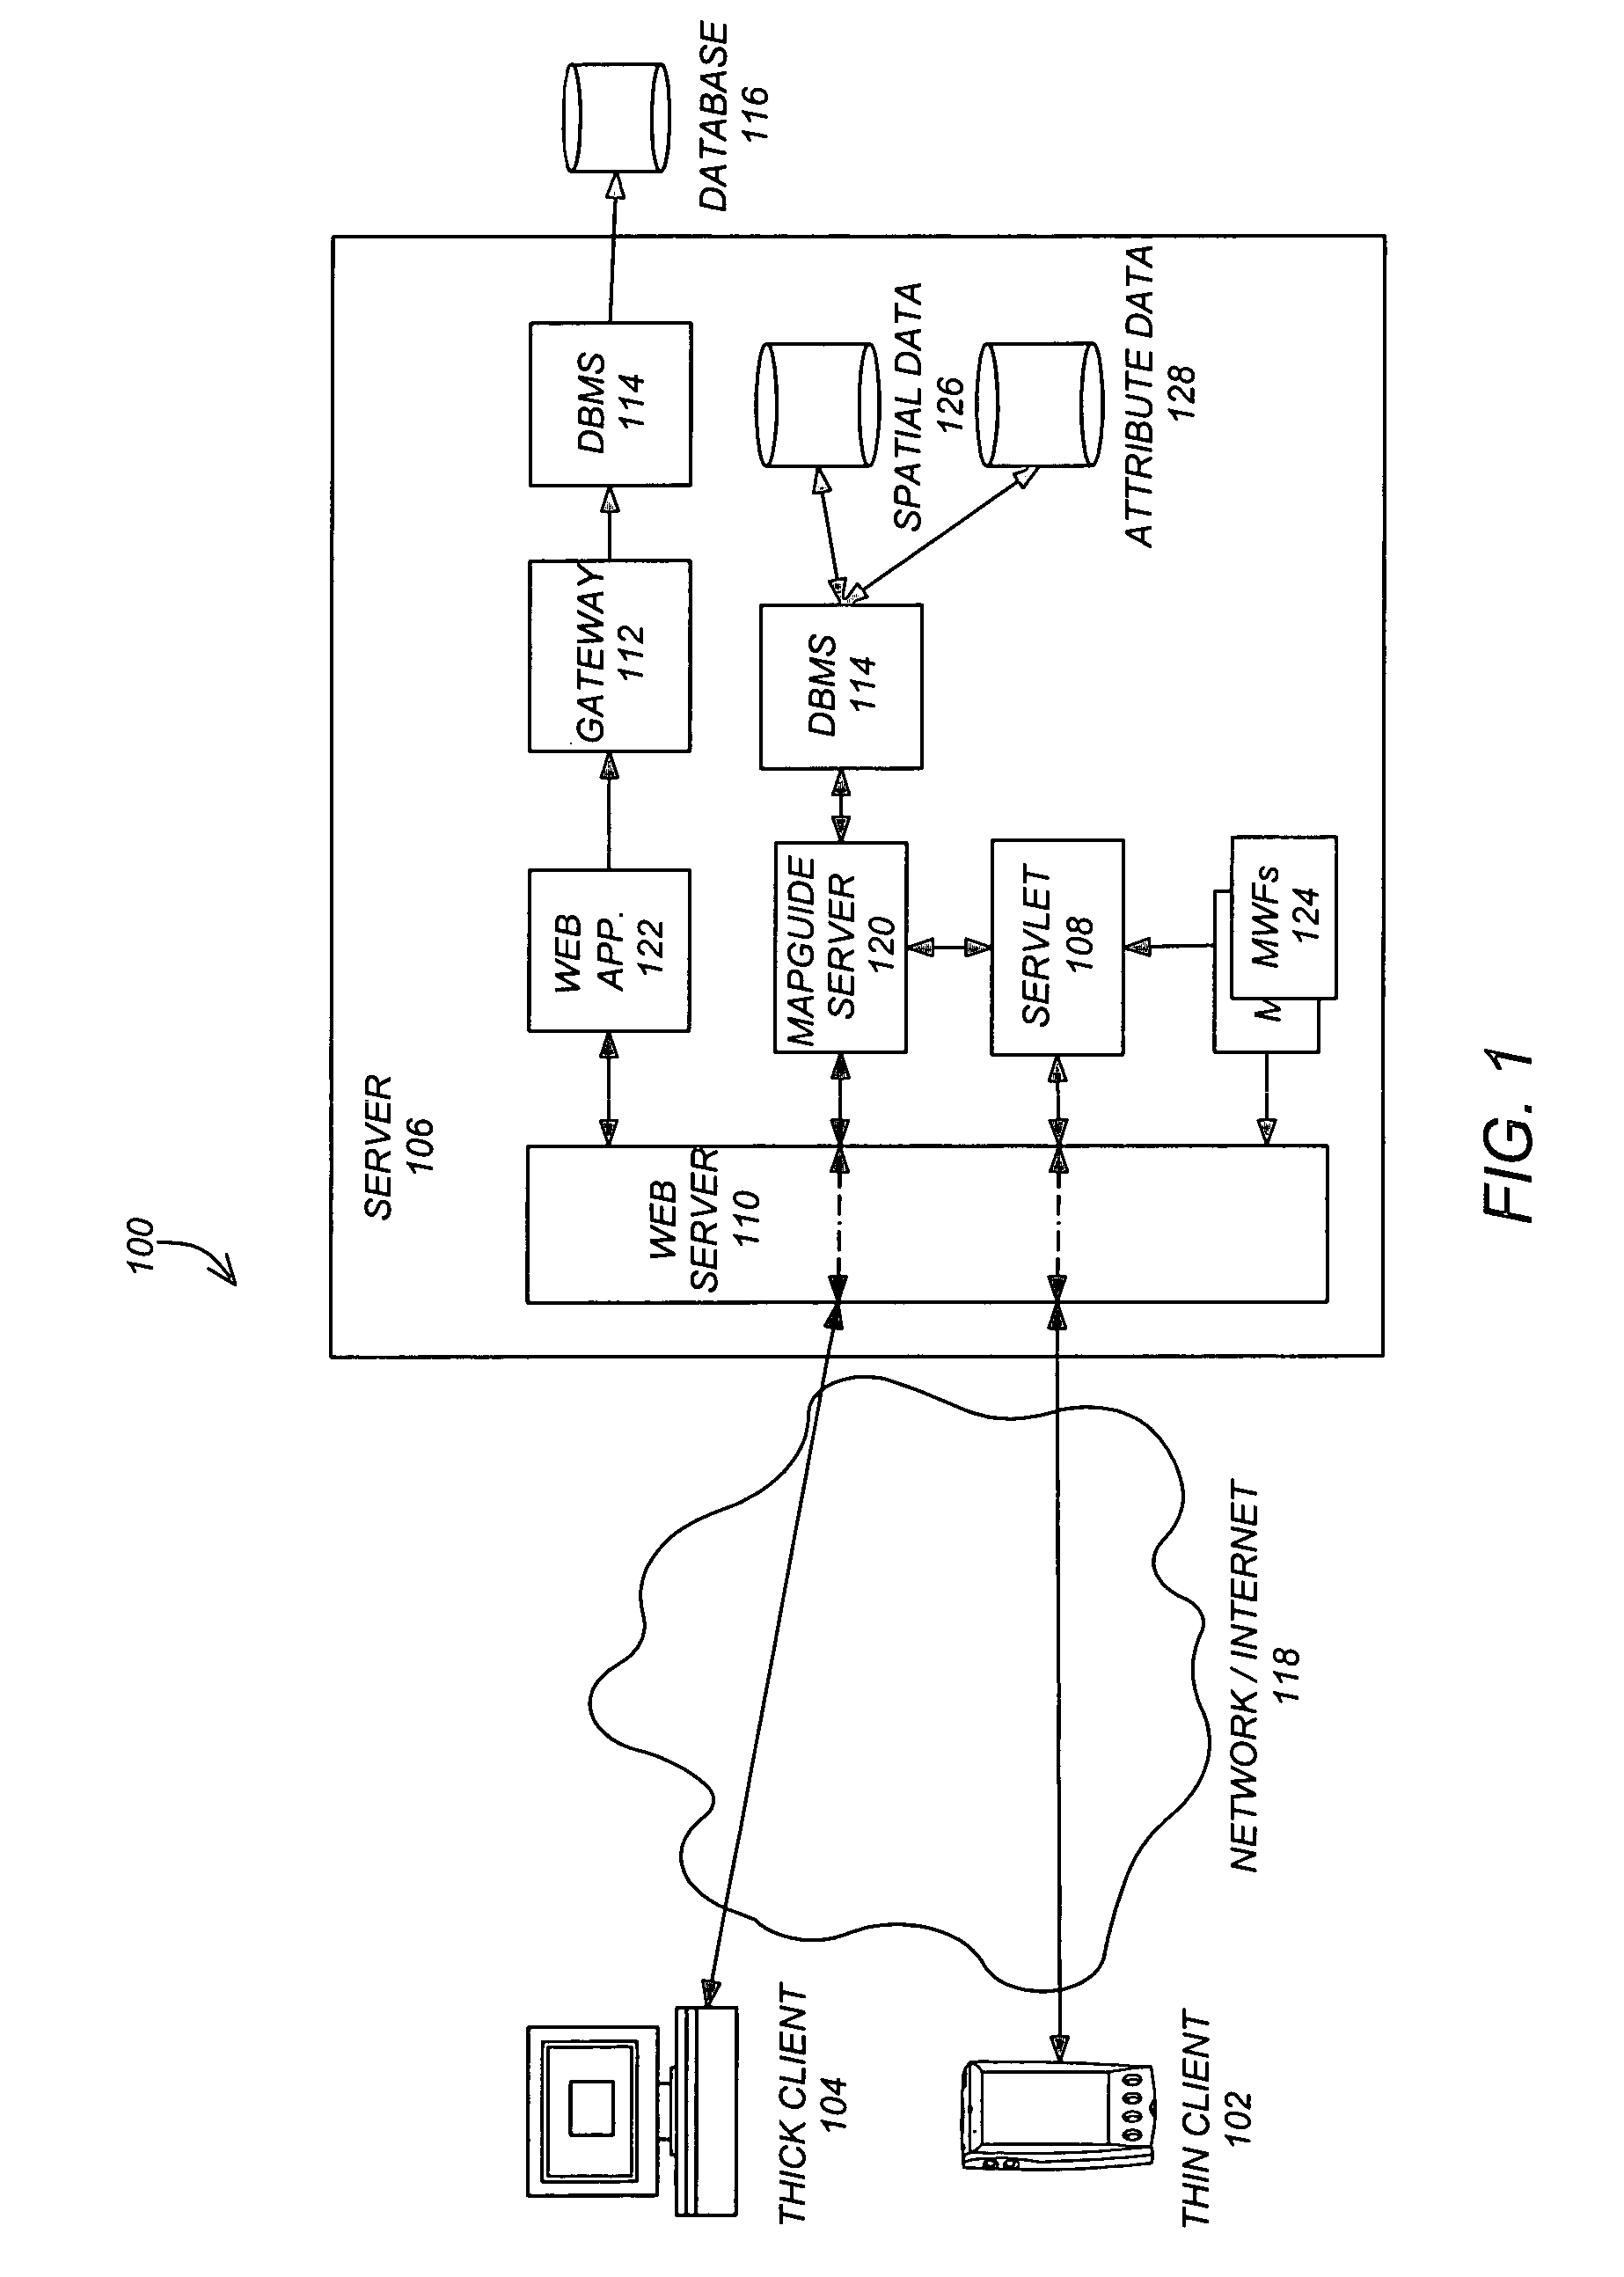 Method and apparatus for providing access to maps on a thin client